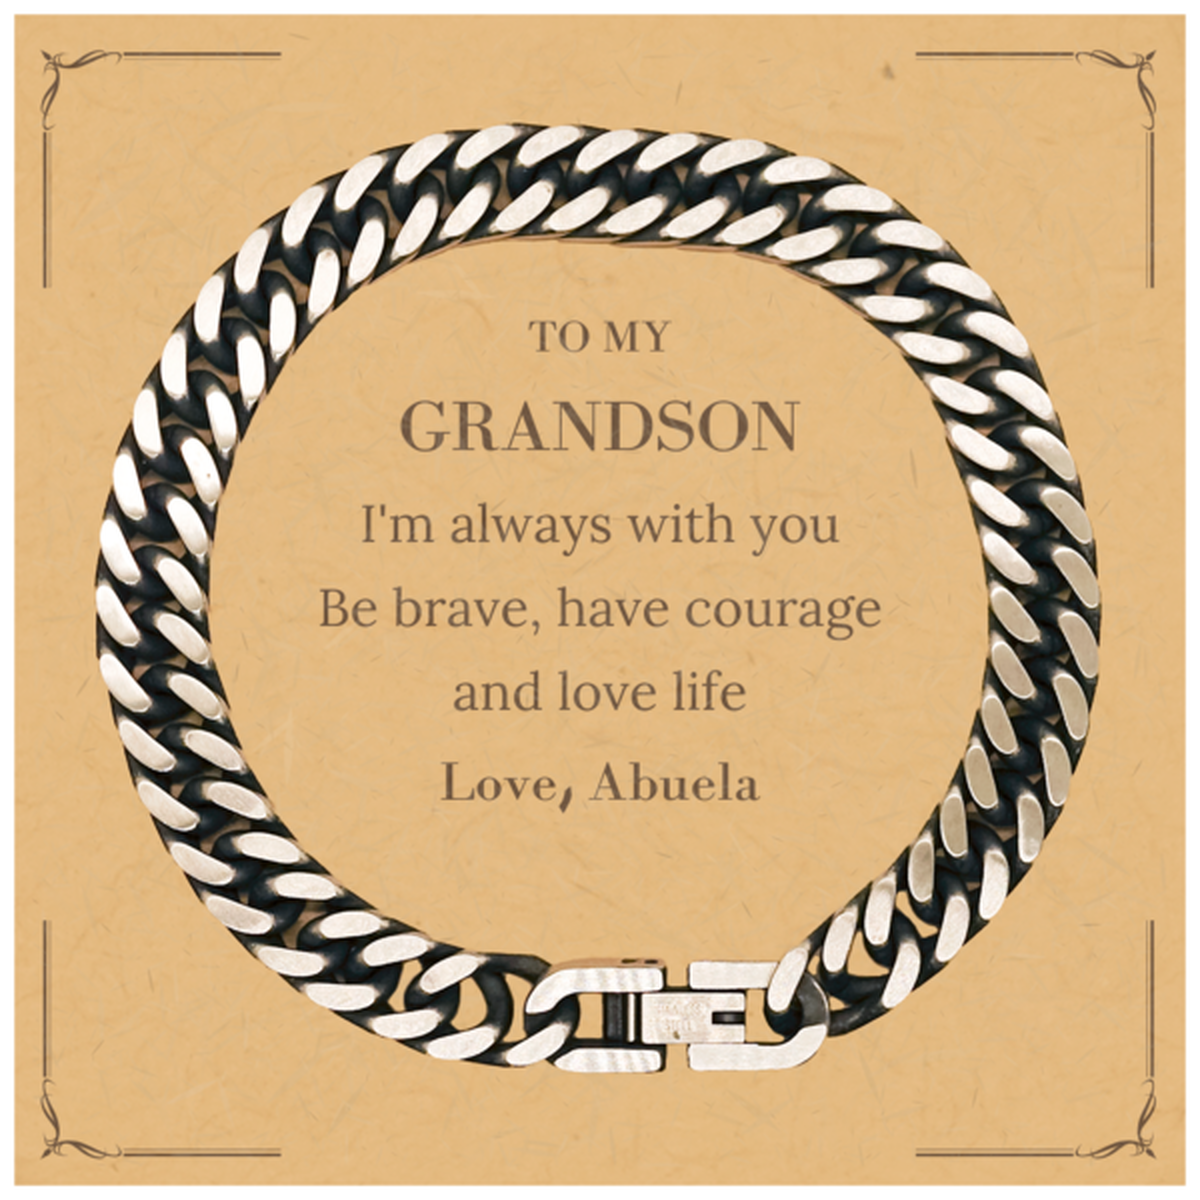 To My Grandson Gifts from Abuela, Unique Cuban Link Chain Bracelet Inspirational Christmas Birthday Graduation Gifts for Grandson I'm always with you. Be brave, have courage and love life. Love, Abuela